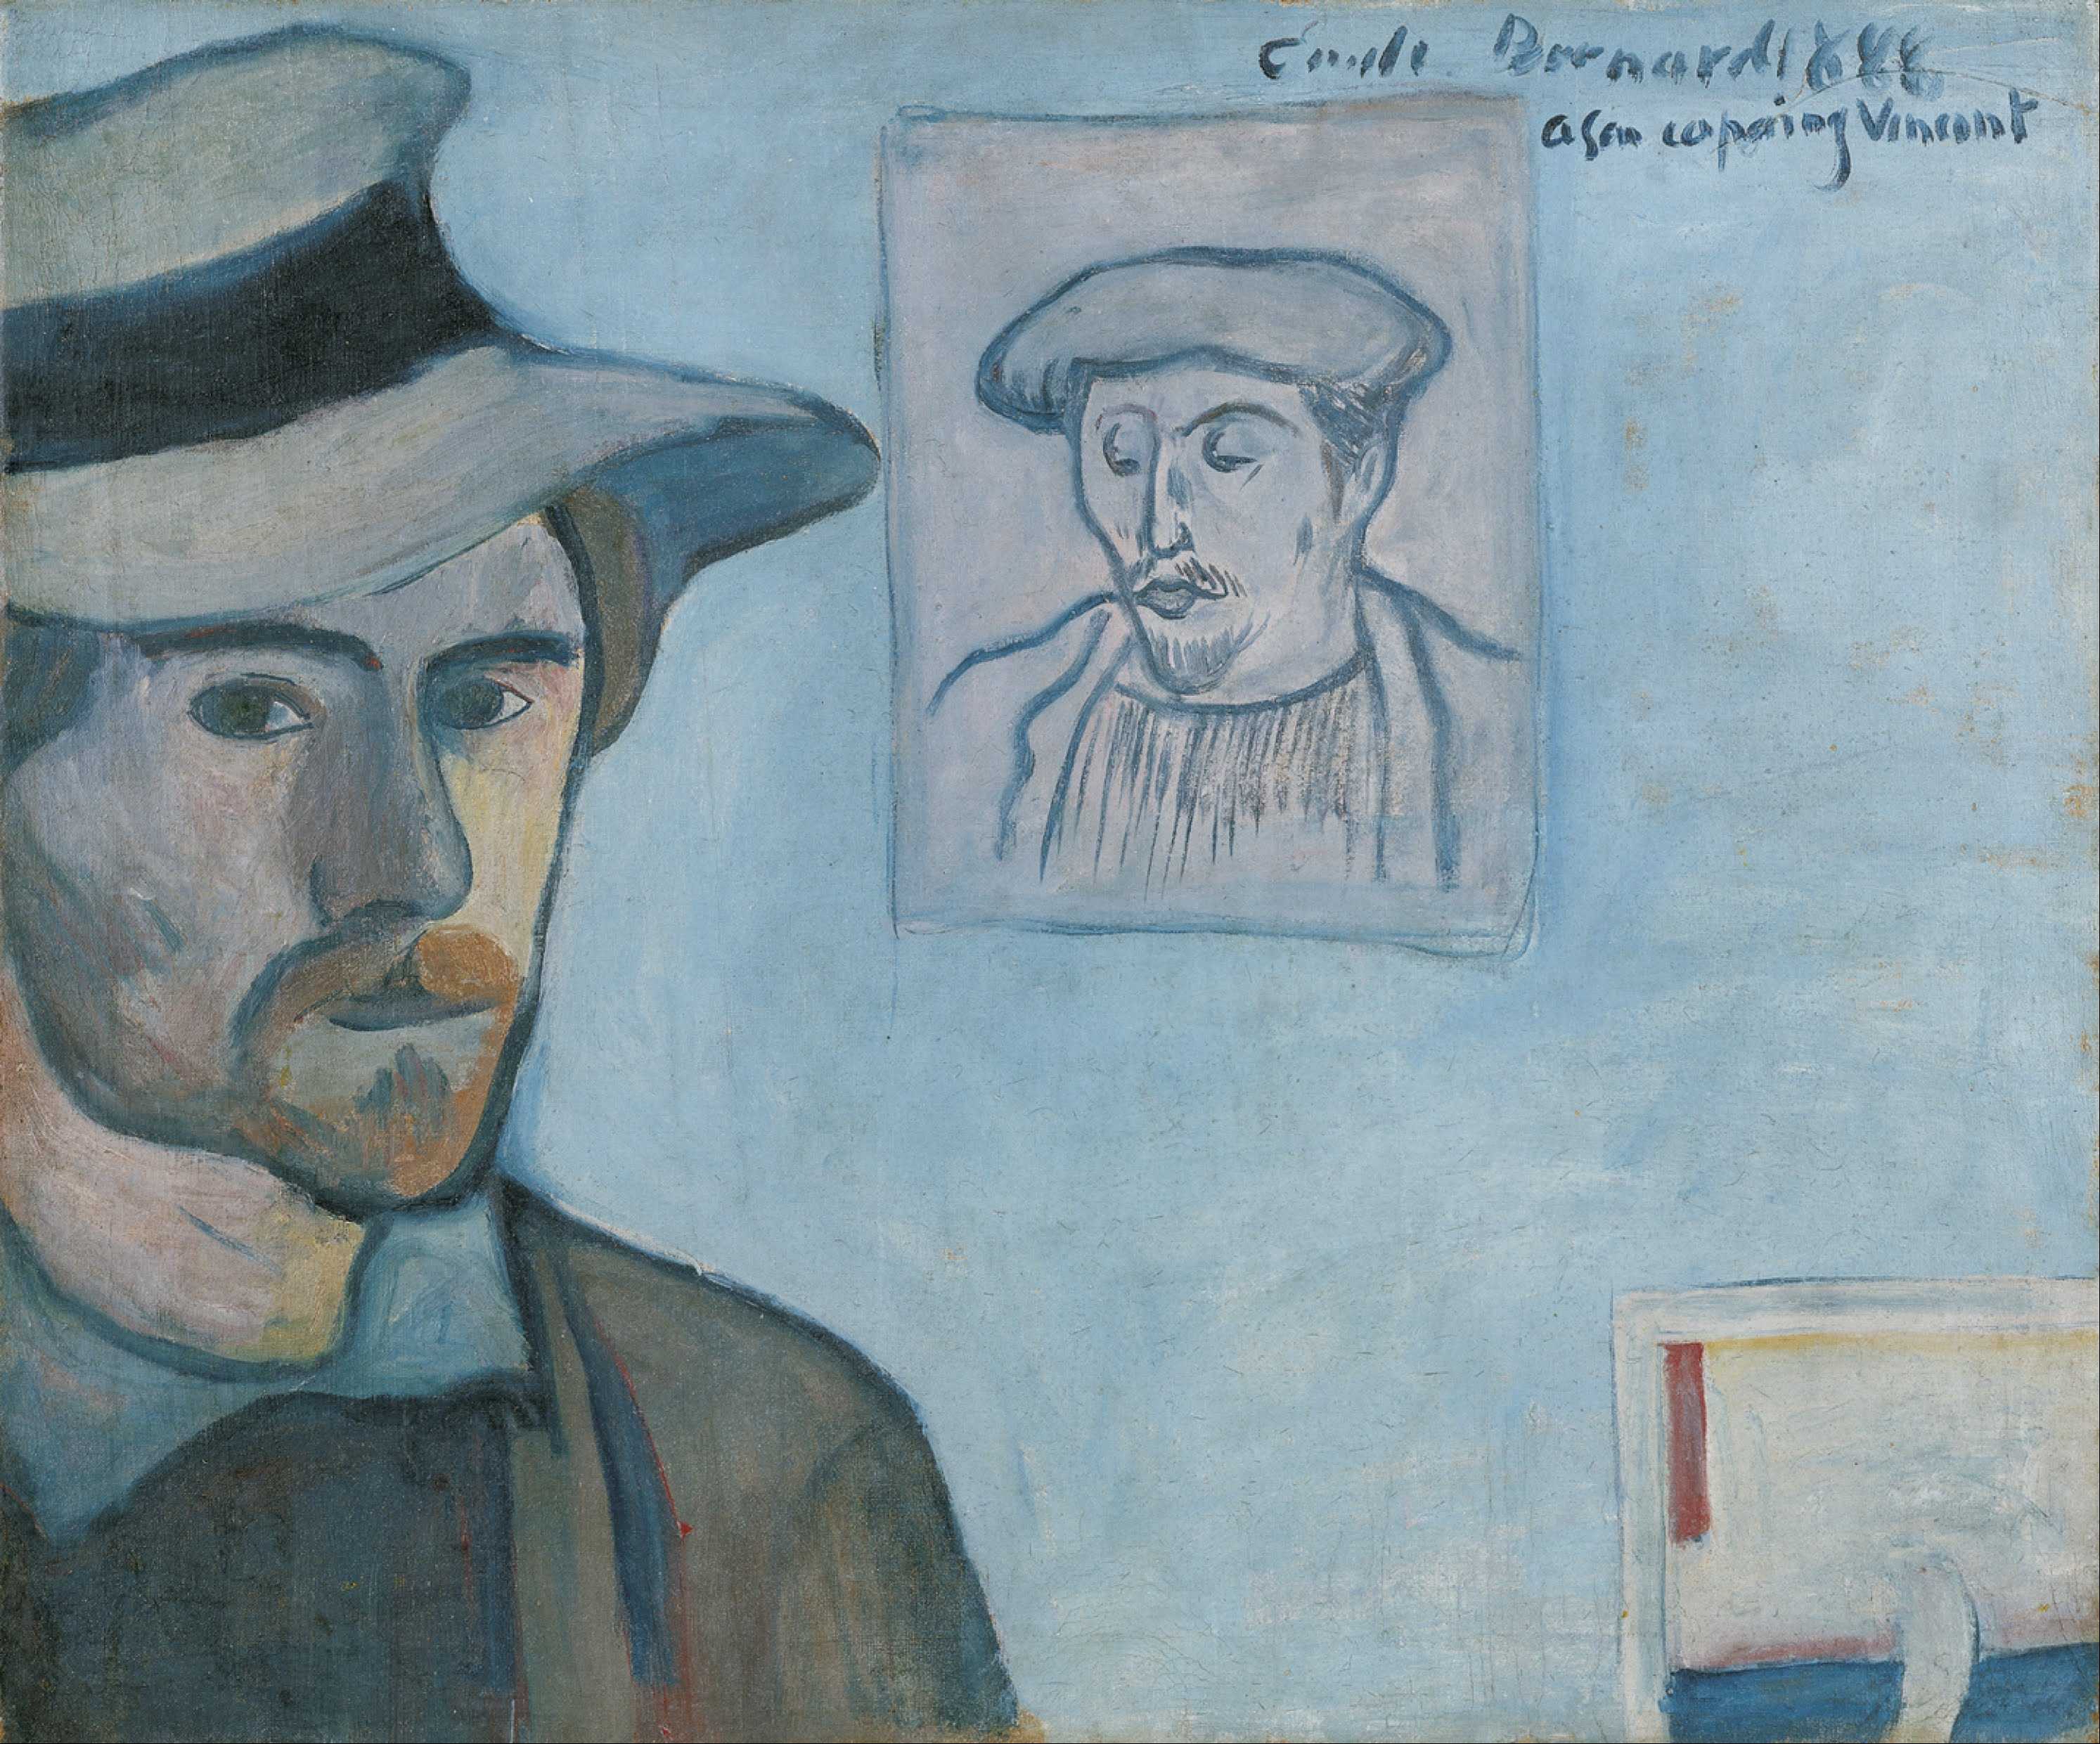 Find out more about Emile Bernard - Self-portrait with portrait of Gauguin